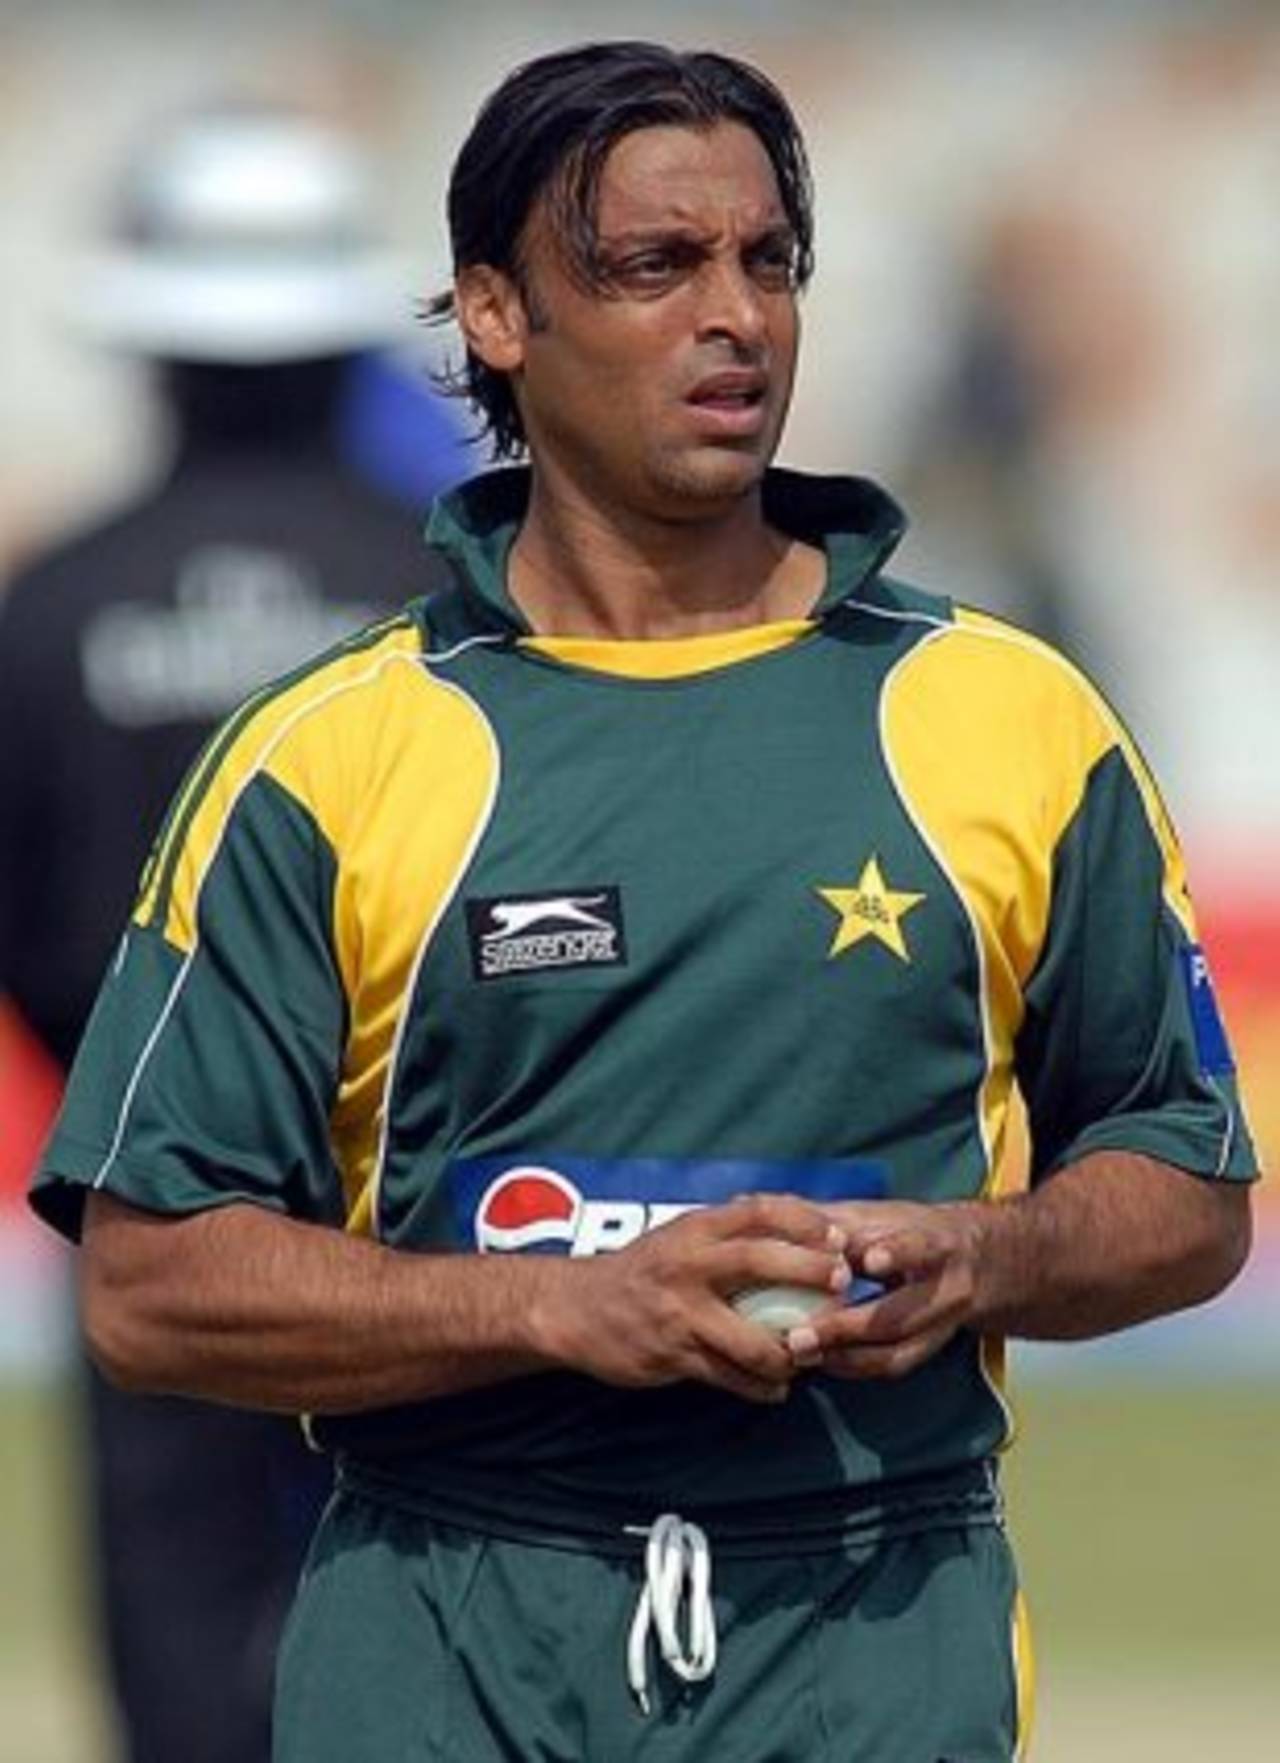 Shoaib Akhtar: "I kept quiet because I have a central contract and didn't want to offend the PCB."&nbsp;&nbsp;&bull;&nbsp;&nbsp;Sohail Abbas